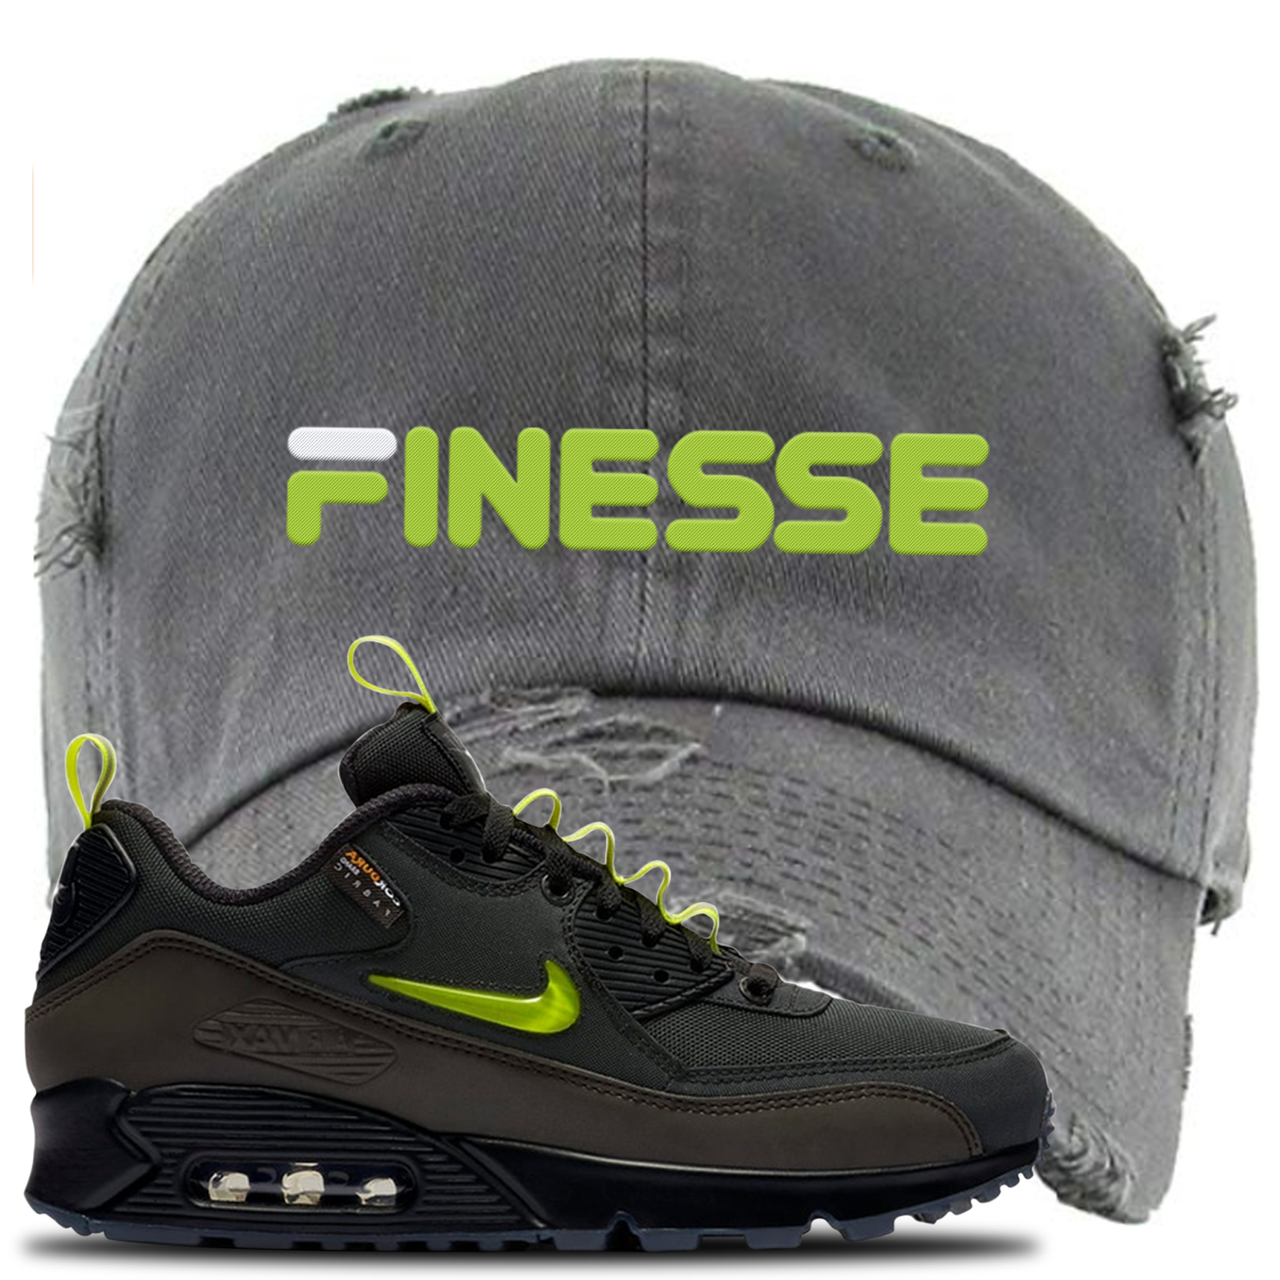 The Basement X Air Max 90 Manchester Finesse Dark Gray Sneaker Hook Up Distressed Dad Hat